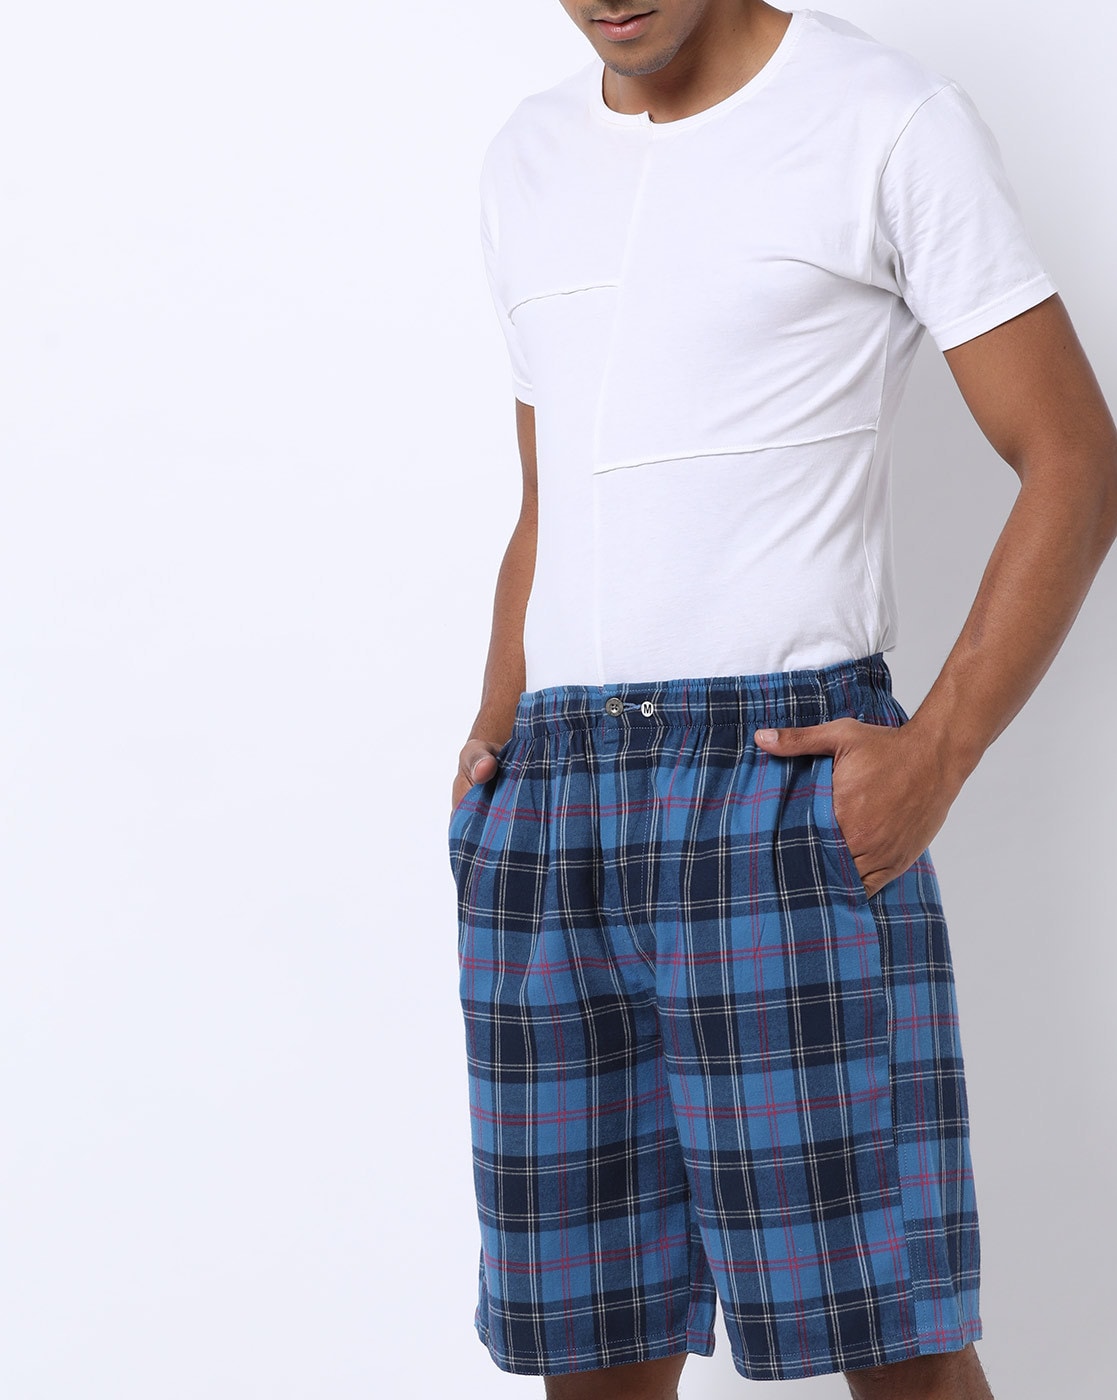 Buy Blue Shorts & 3/4ths for Men by NETPLAY Online